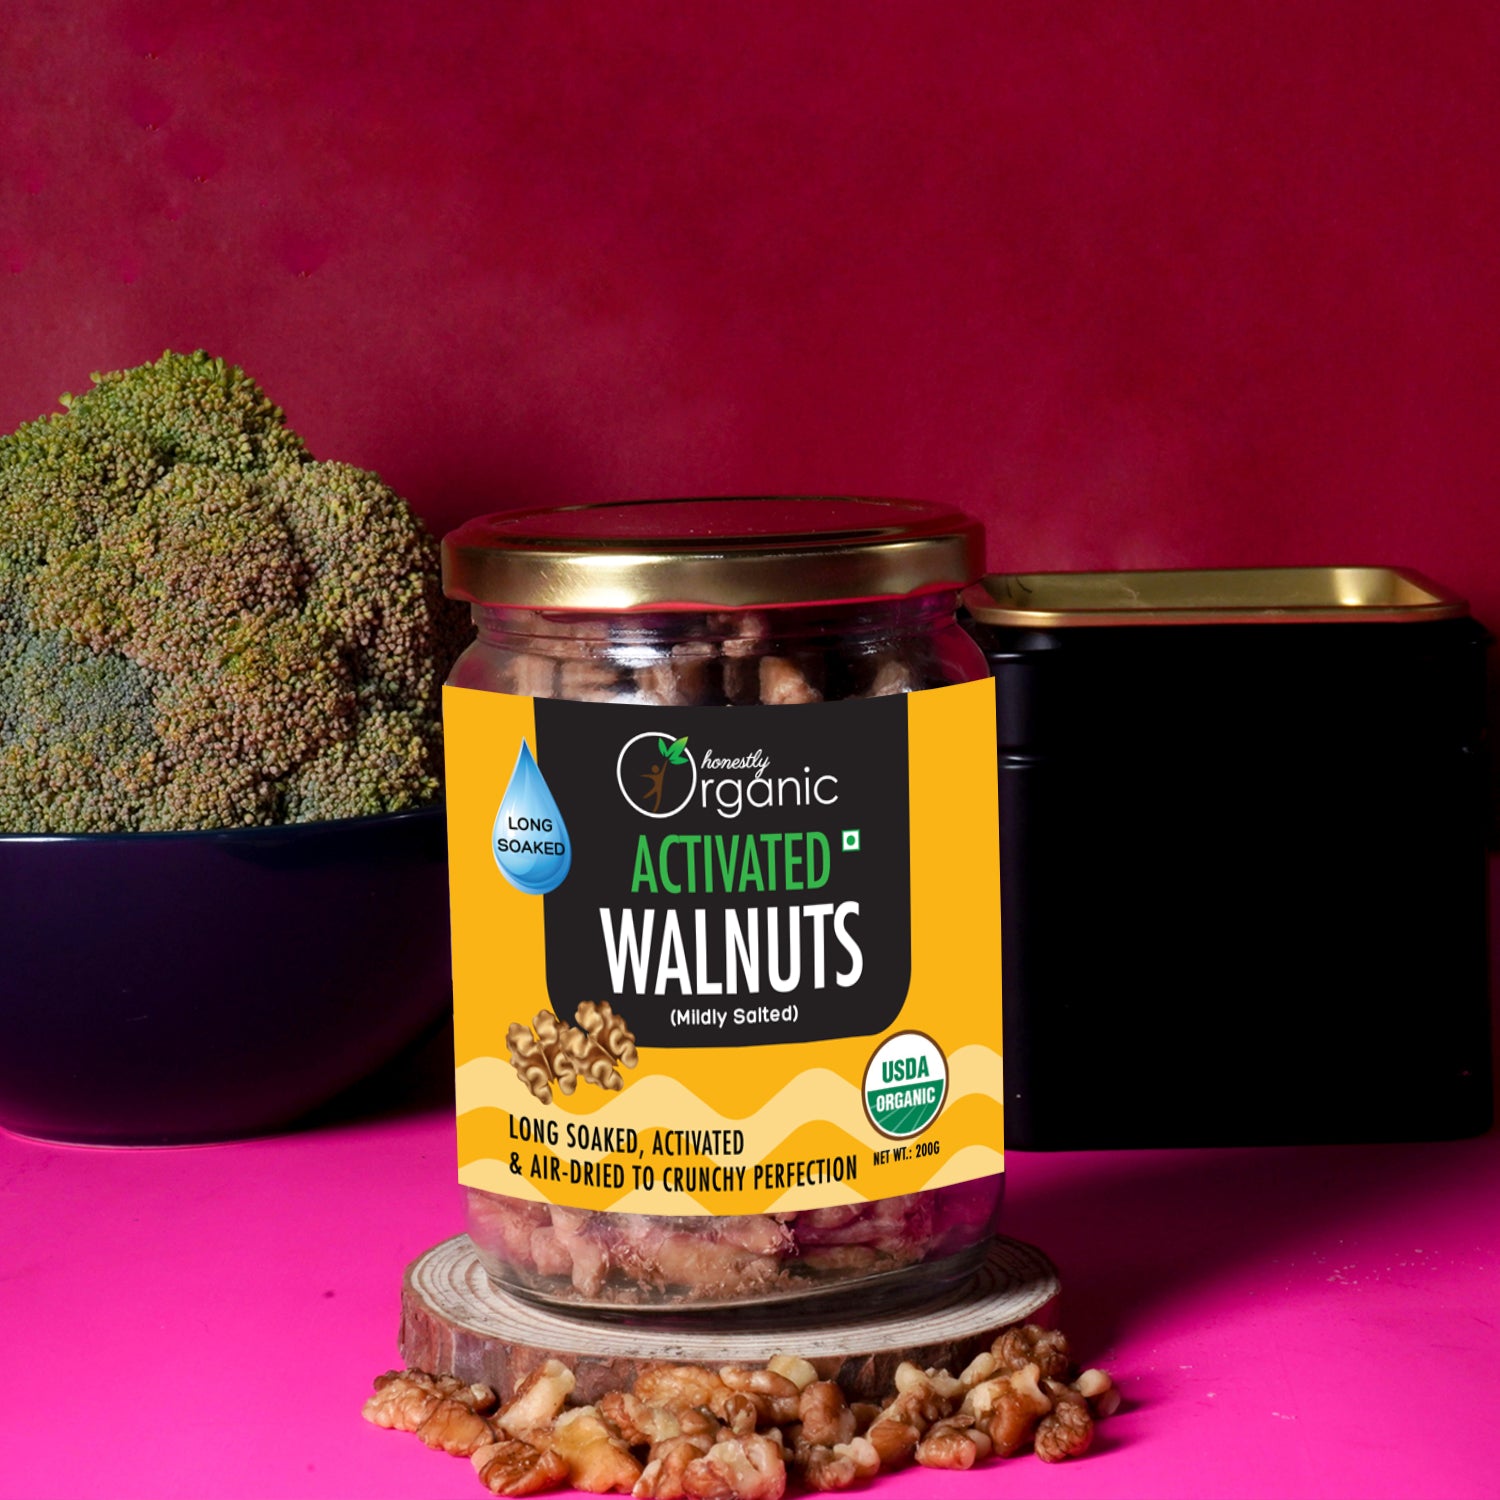 D-Alive Organic Walnuts | Activated/Sprouted | Mildly Salted (USDA Organic, Long Soaked & Air Dried)